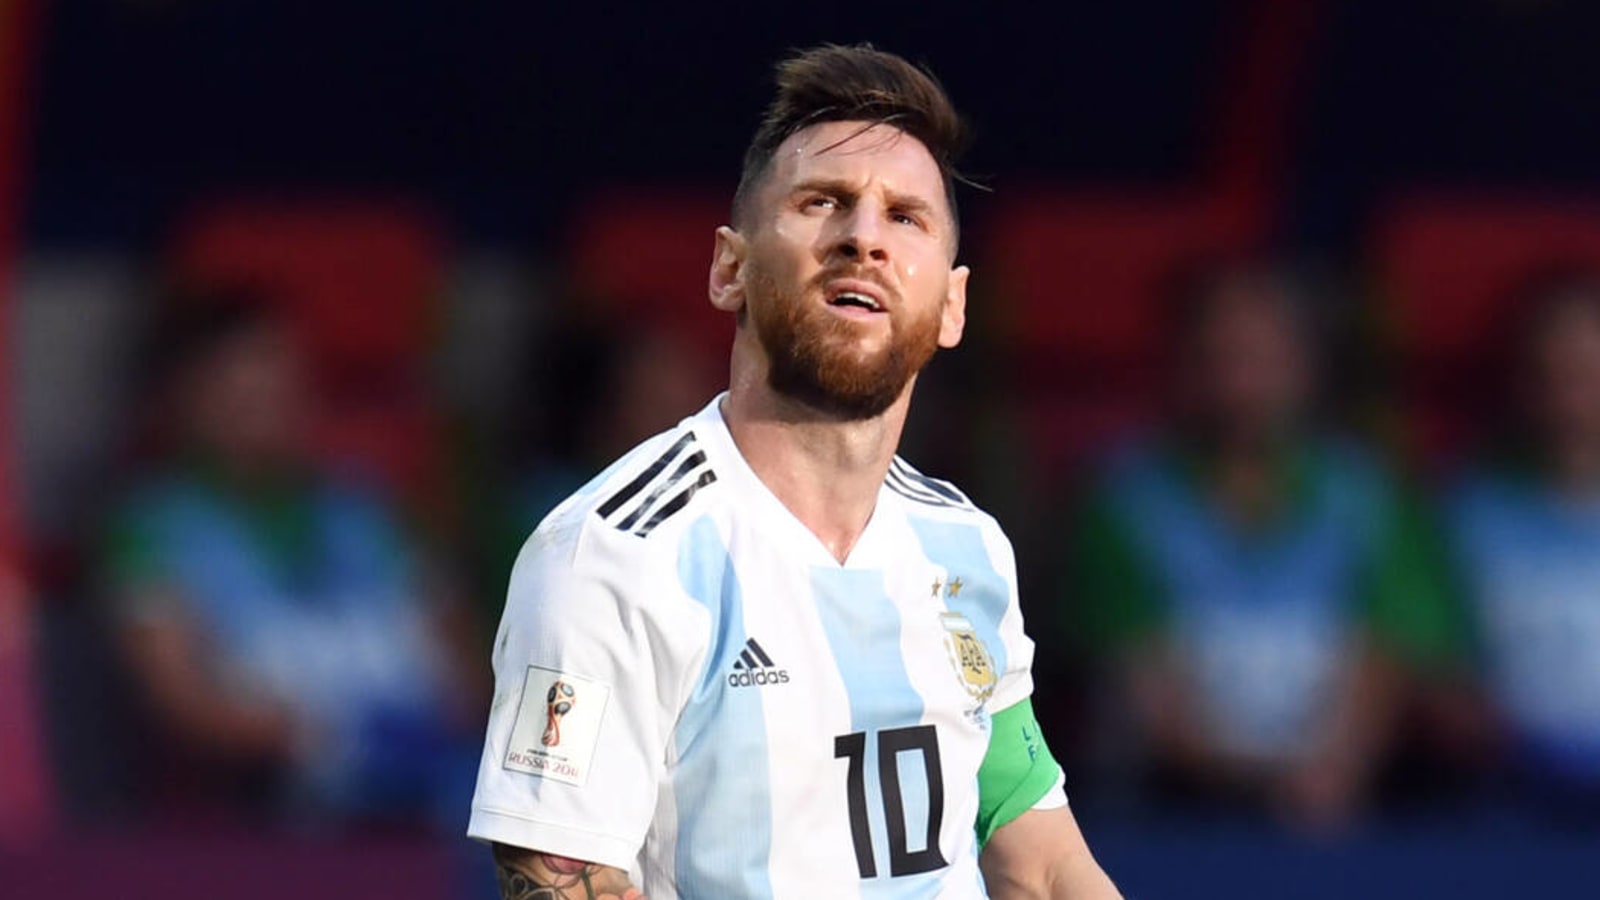 Barcelona seeking legal action over Messi contract details